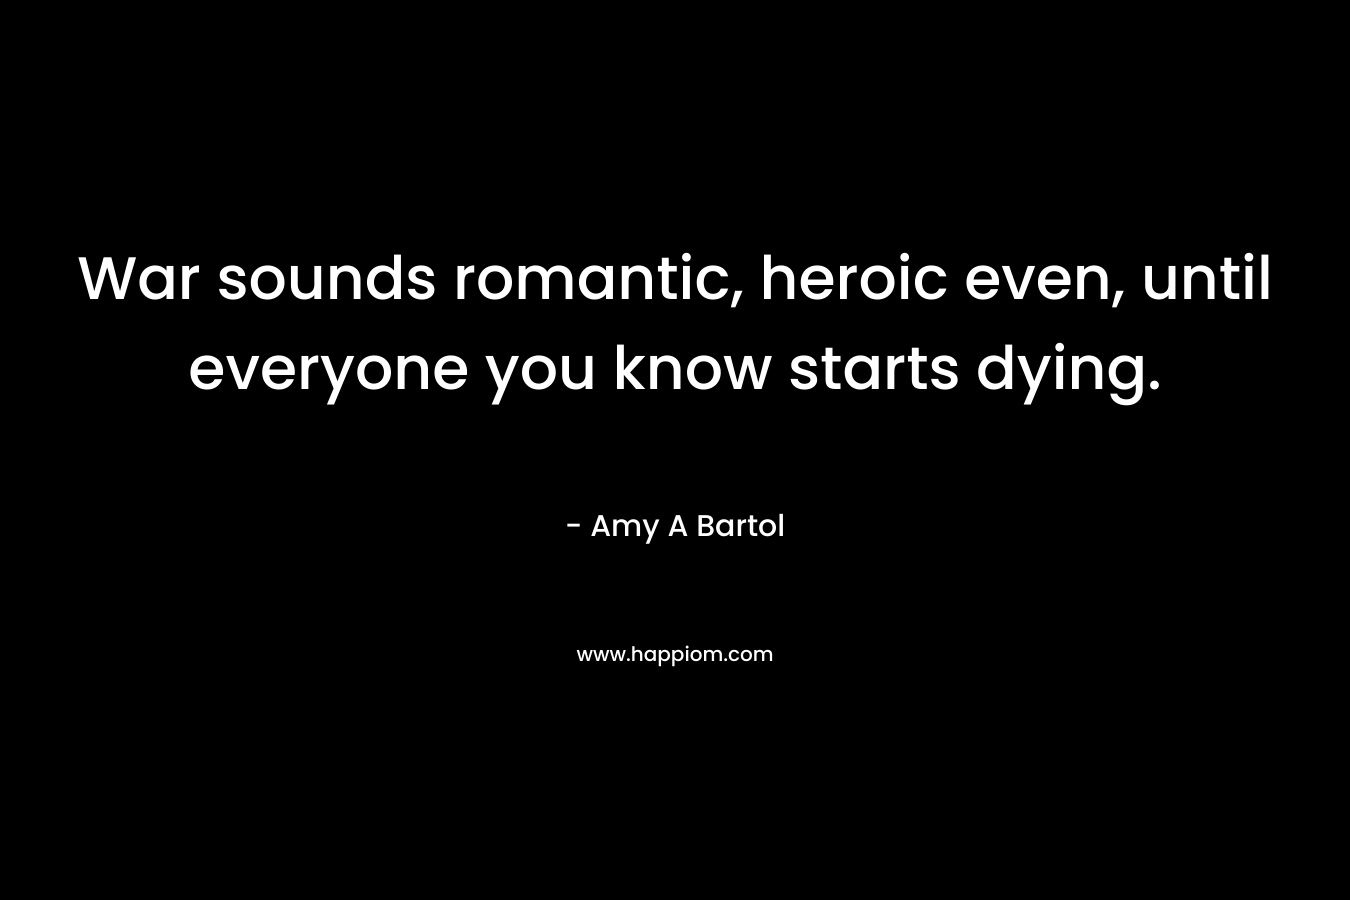 War sounds romantic, heroic even, until everyone you know starts dying. – Amy A Bartol